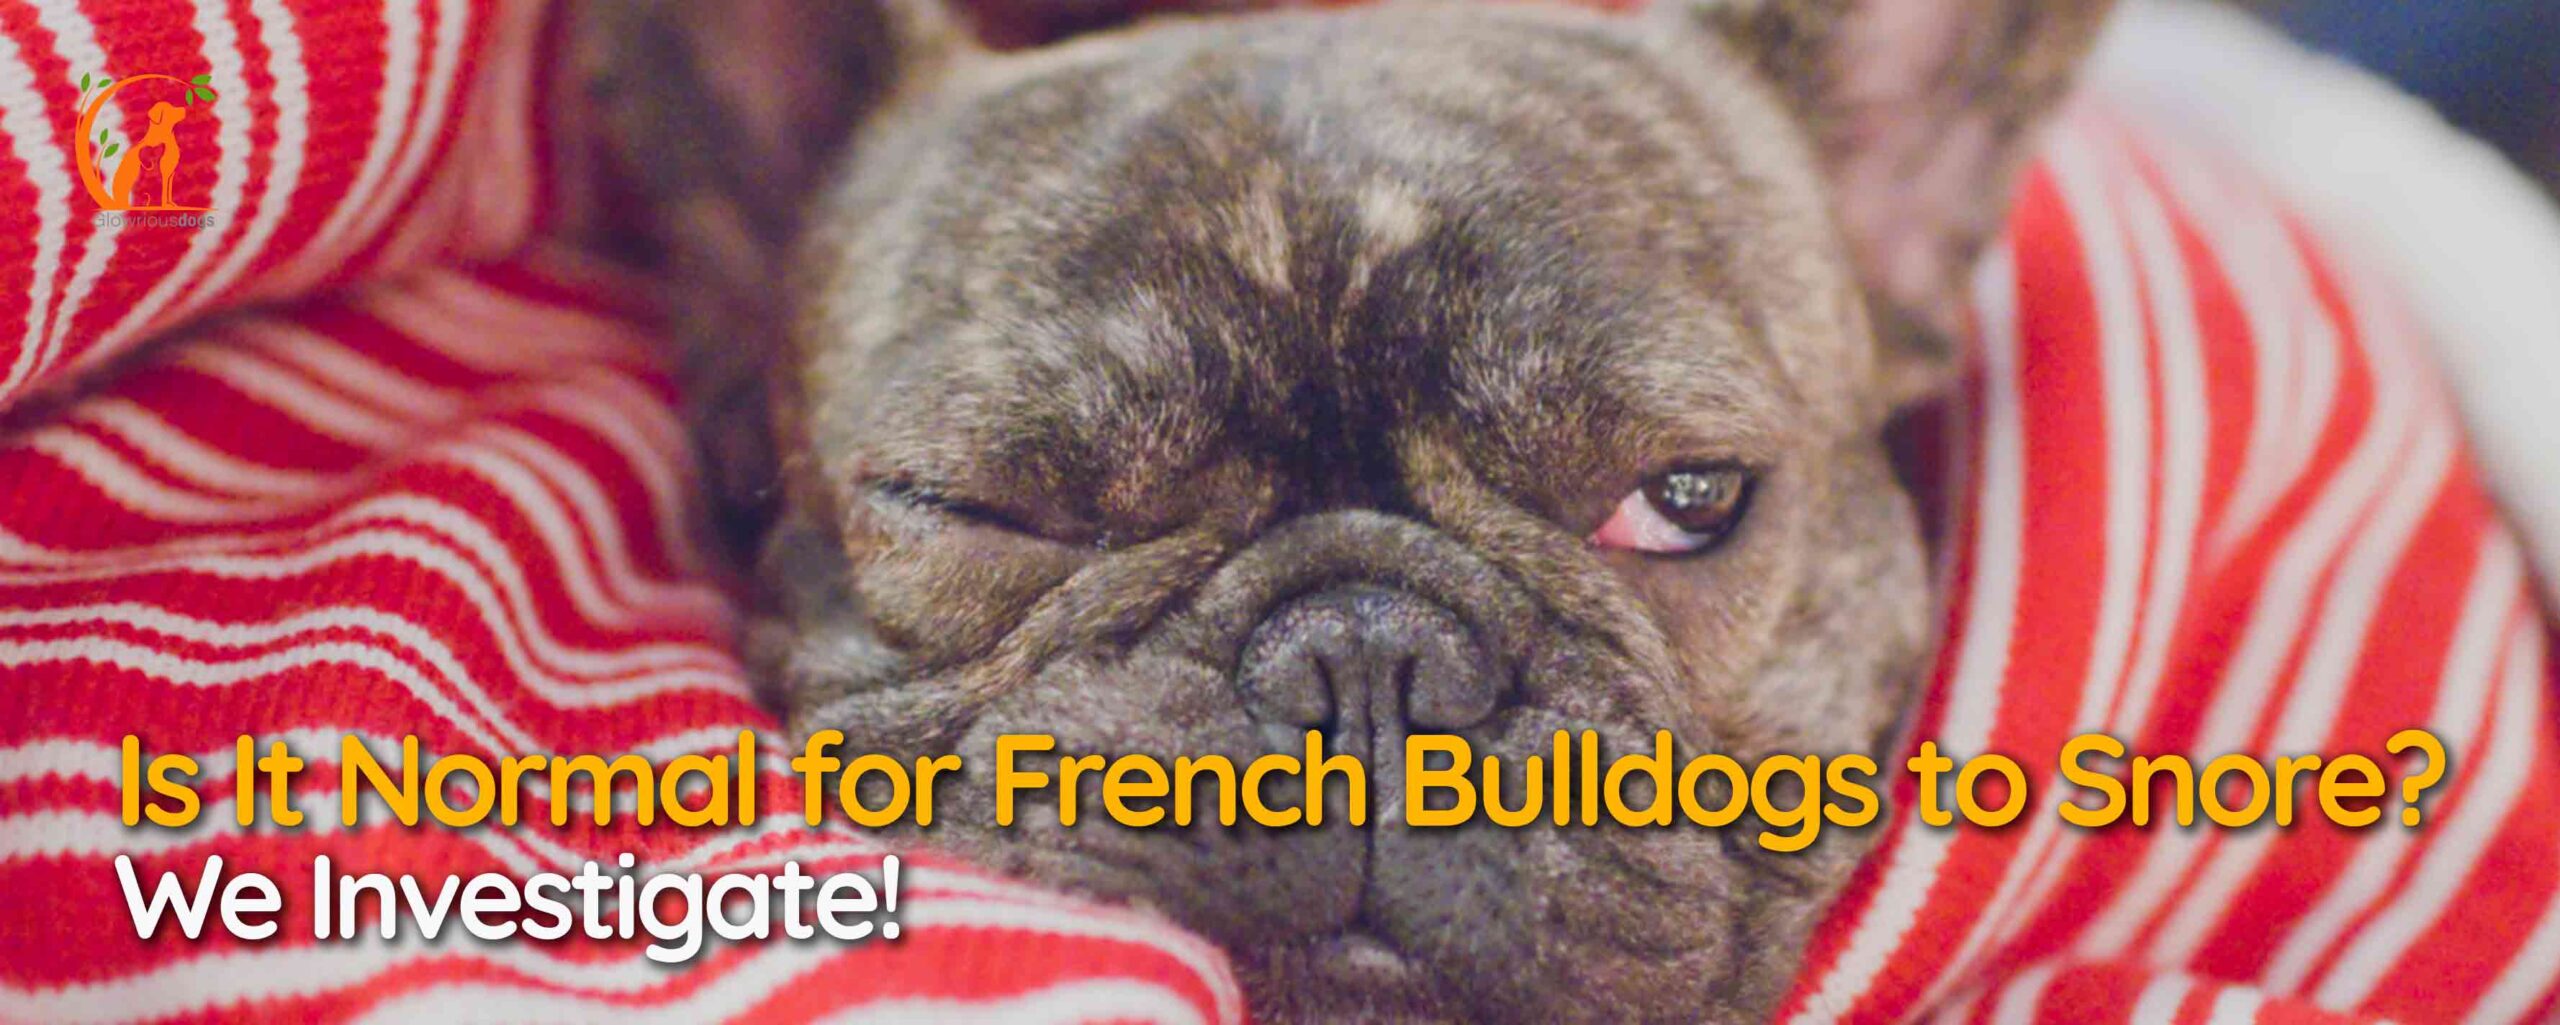 Is It Normal for French Bulldogs to Snore? We Investigate!